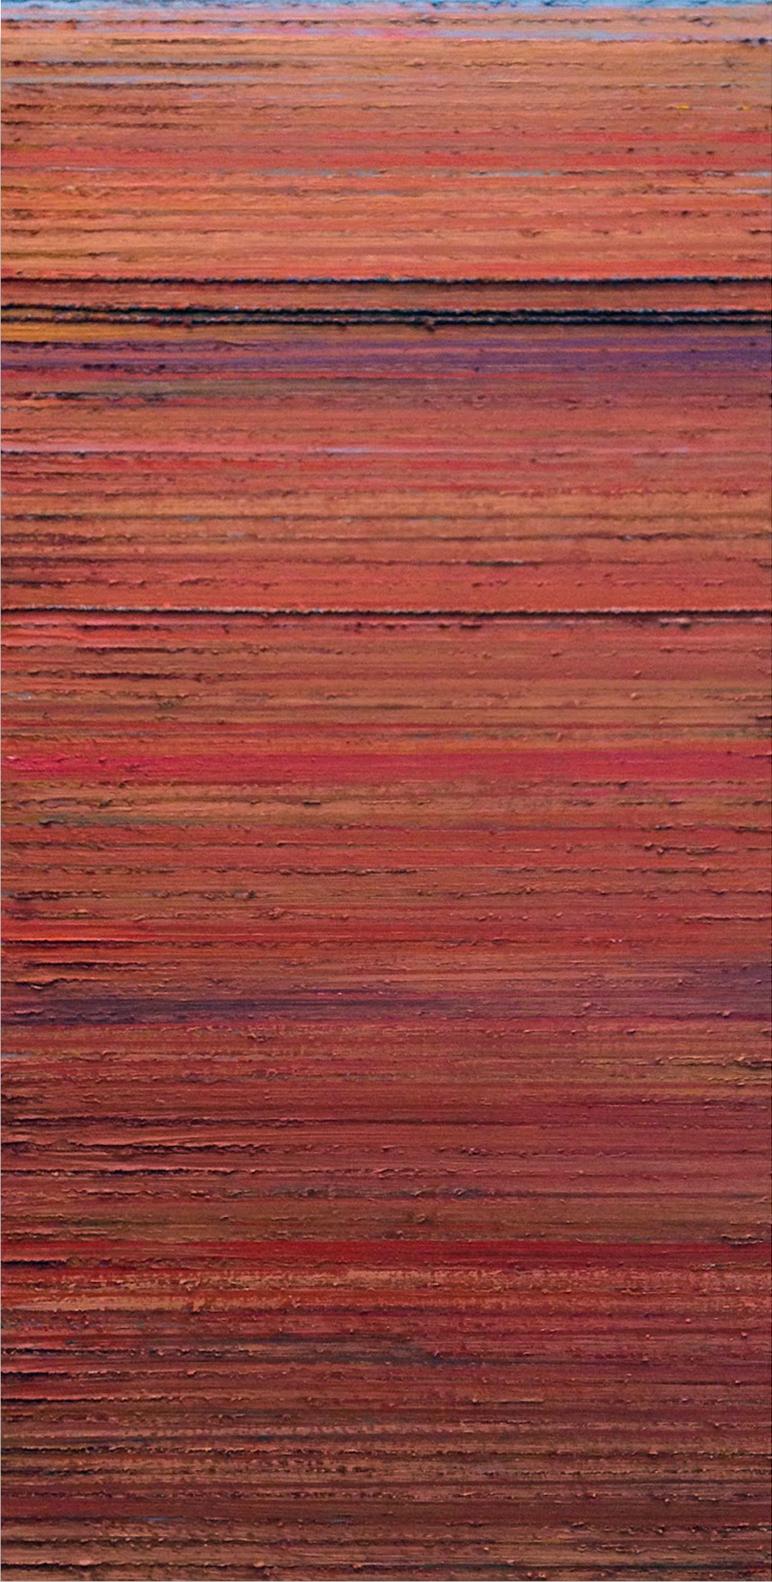 Pat Badt Abstract Painting - Sedona, abstracted red rocks, oil painting